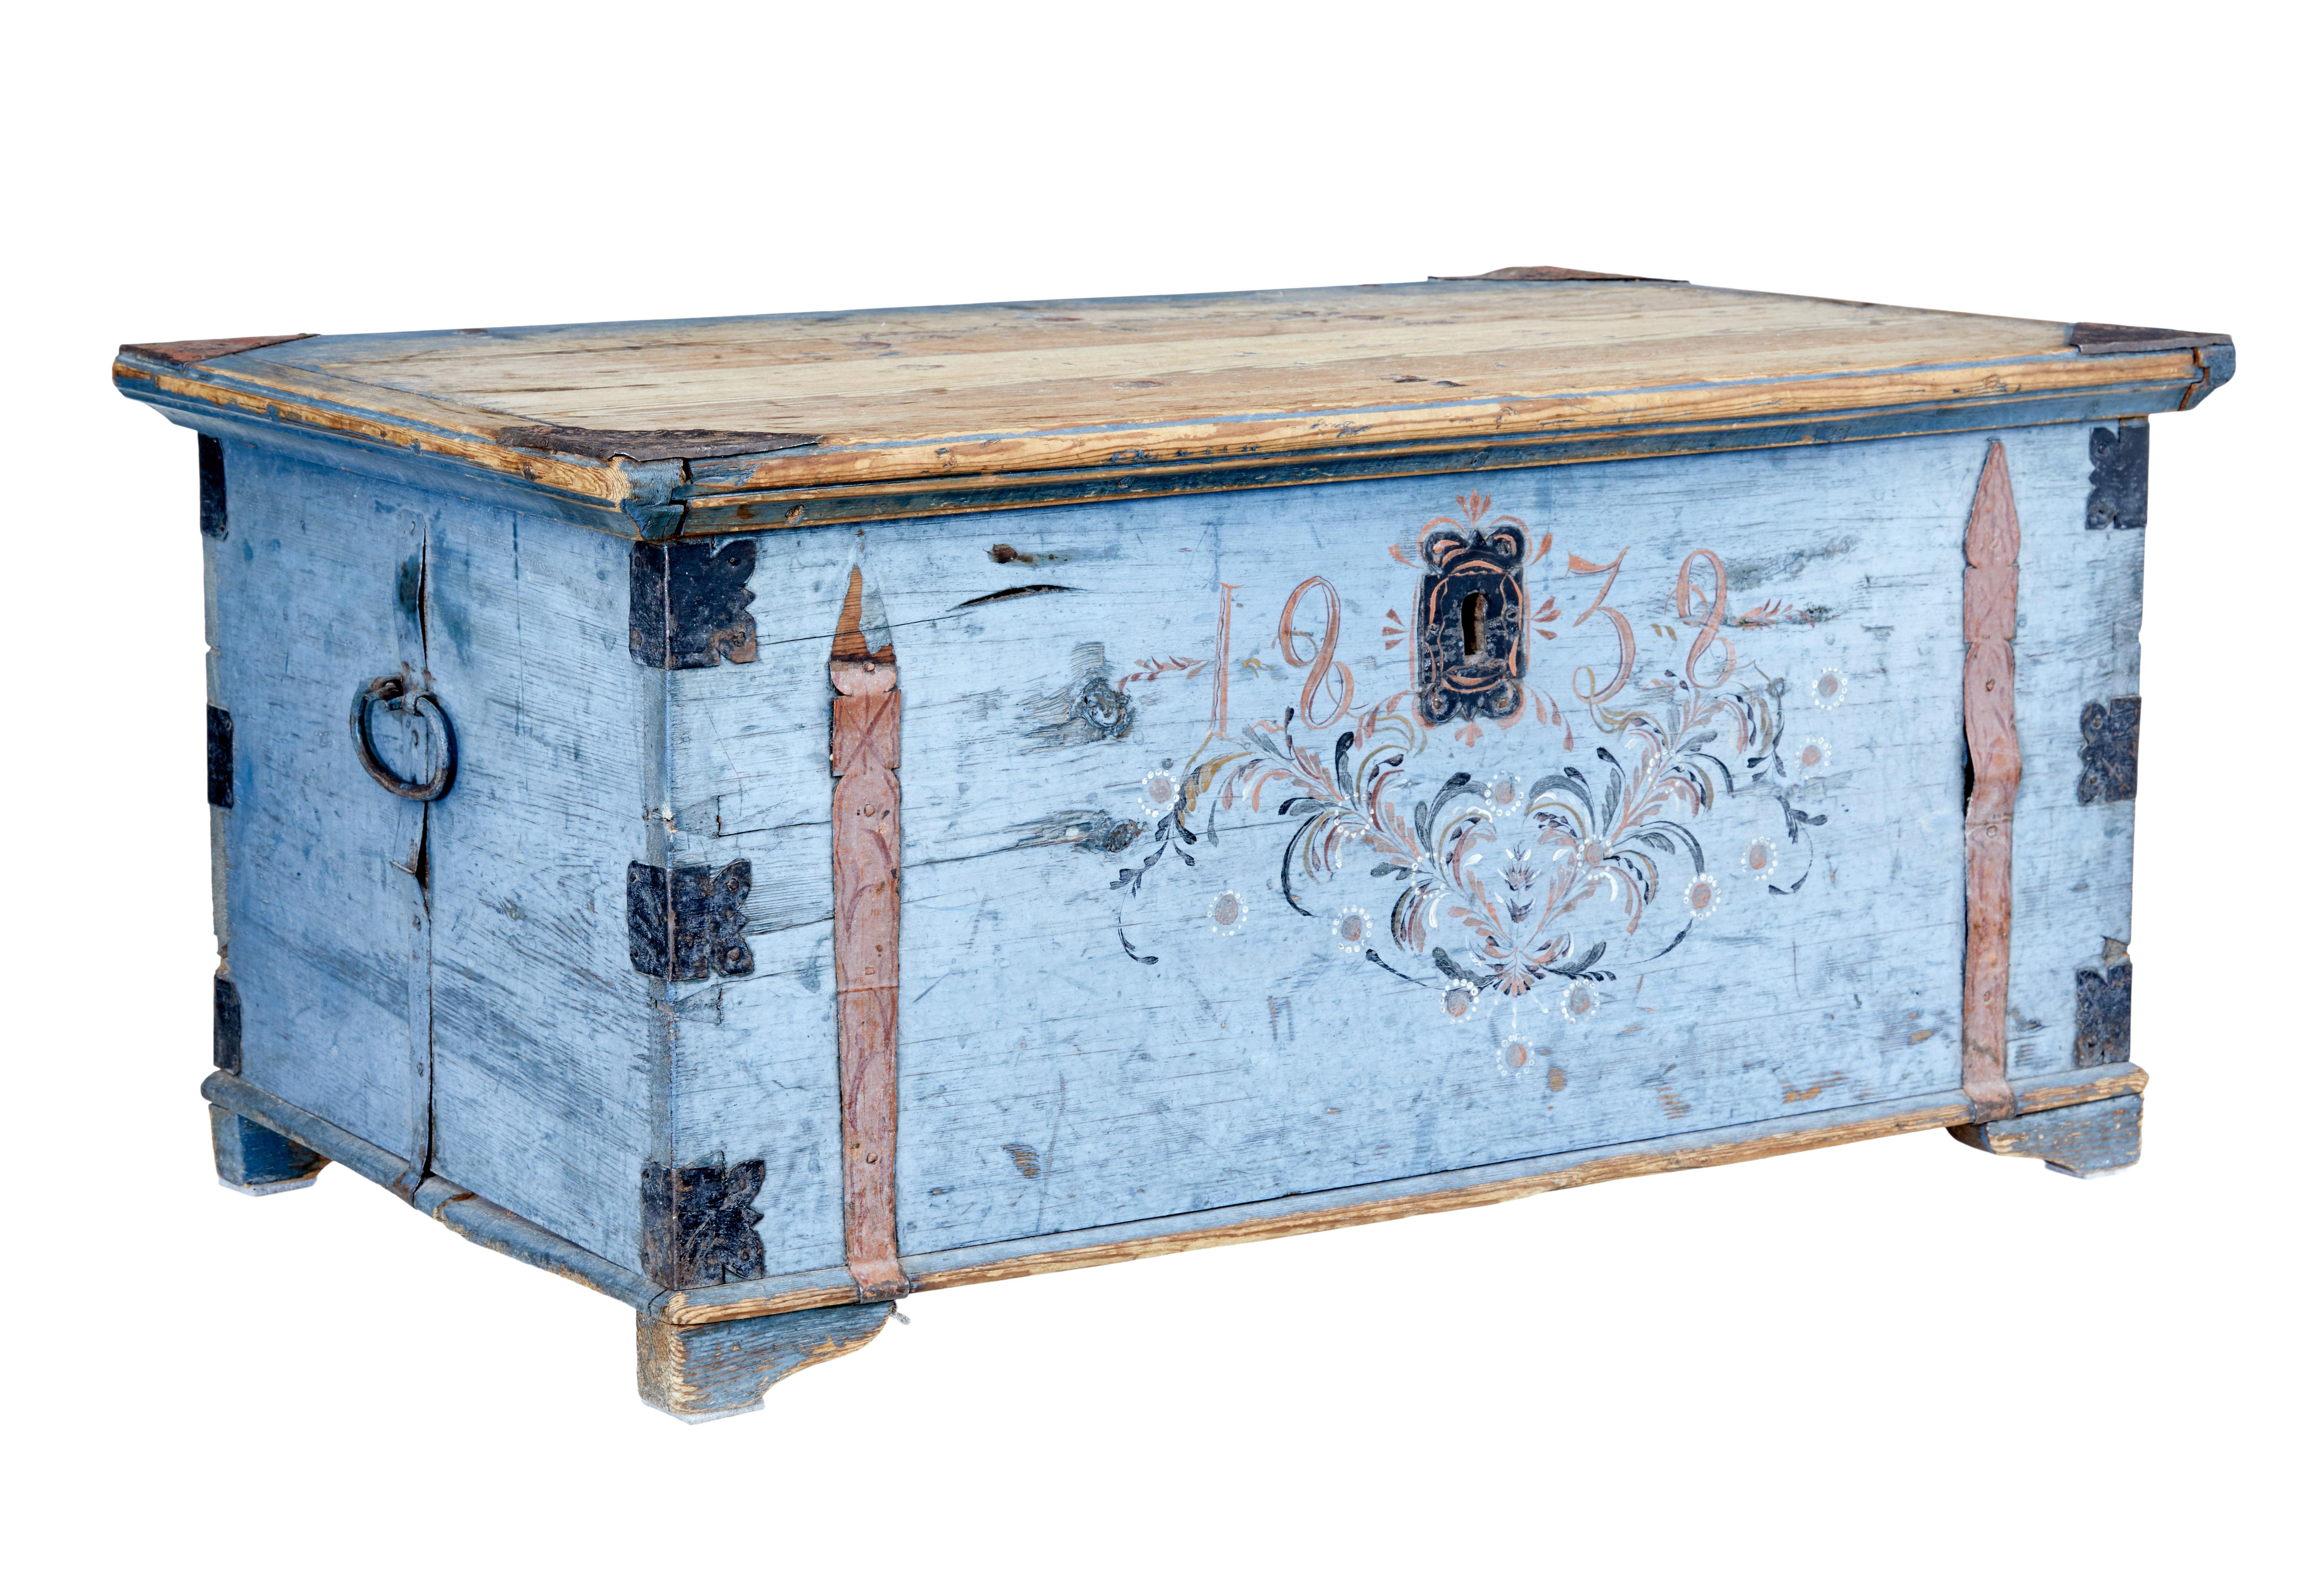 19th century swedish painted pine chest circa 1838.

Decorative painted folk art trunk, baring the hand painted date of 1838. Over time has faded to a desirable muted blue, with contrasting metal strap work. Delicately painted floral swag to the